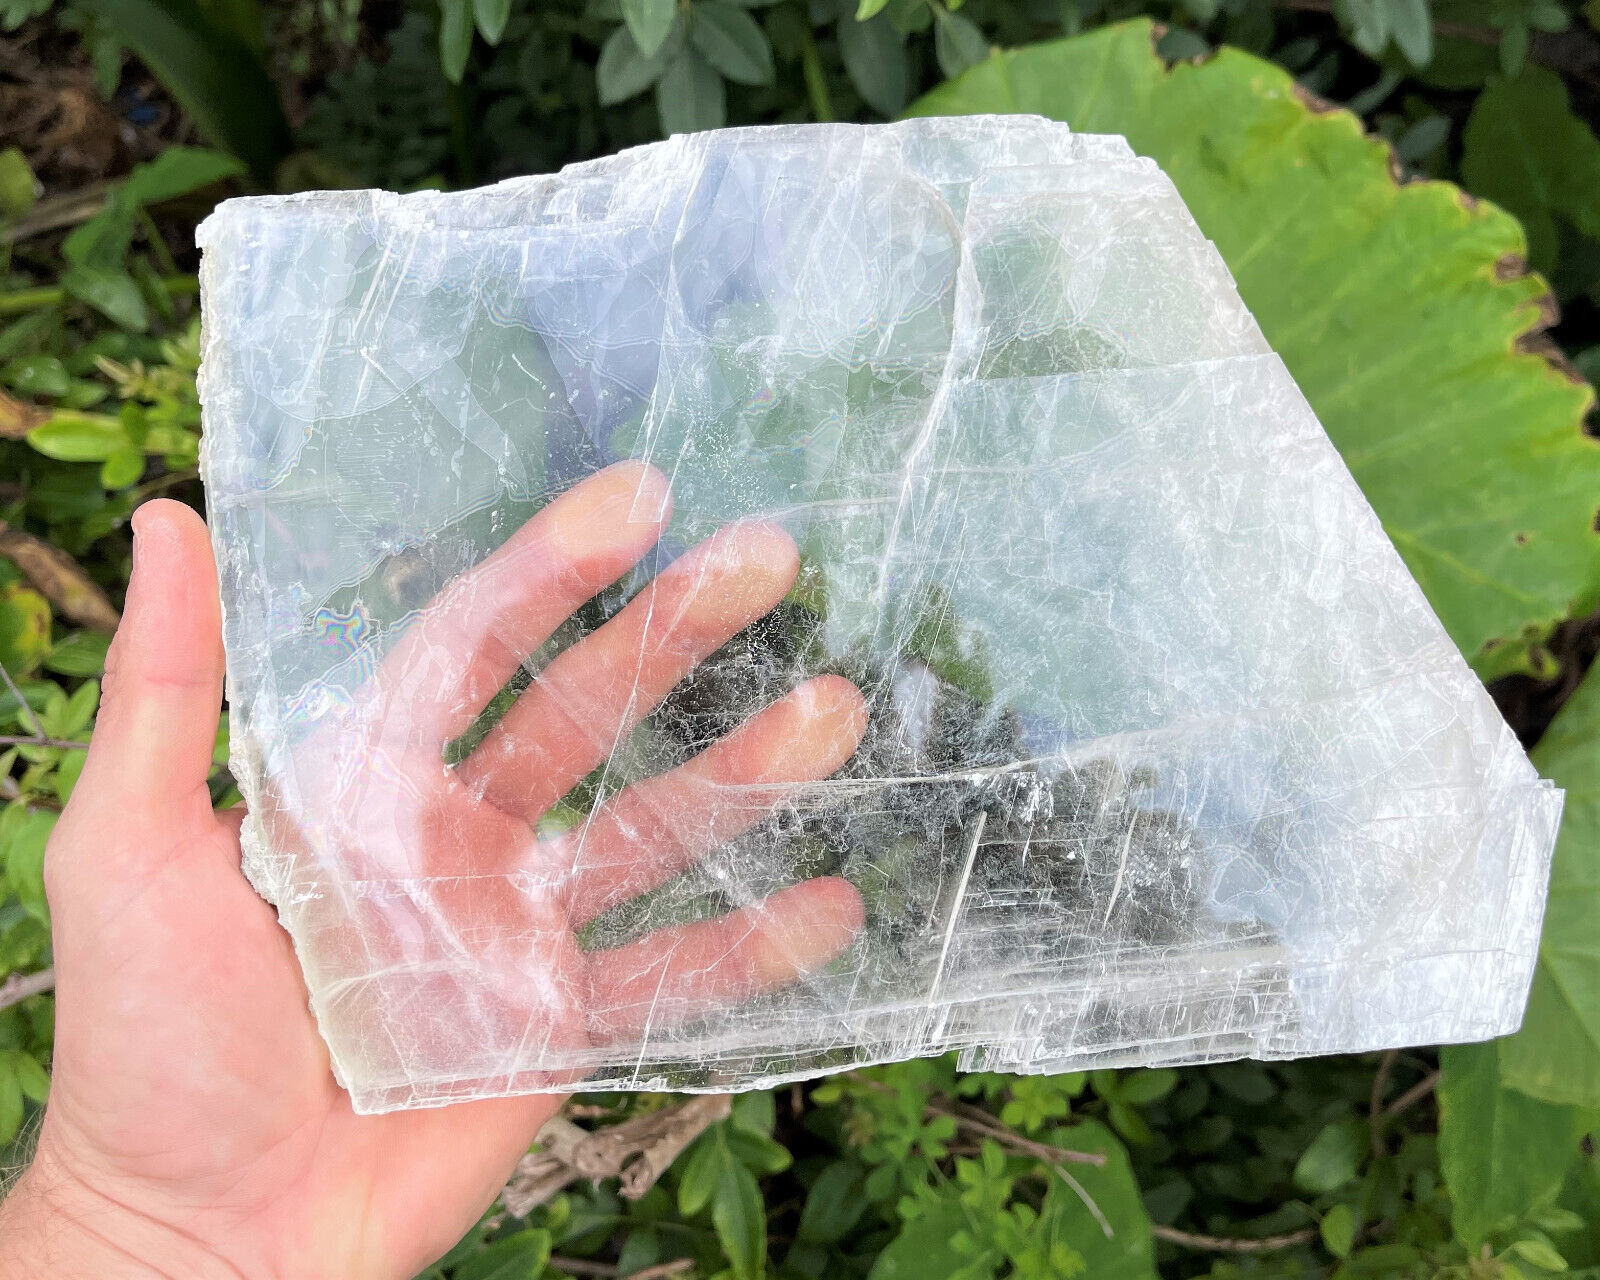 EXTRA LARGE Natural Selenite Slabs, 1-2 lb Stunning Raw Selenite Slices + Stand